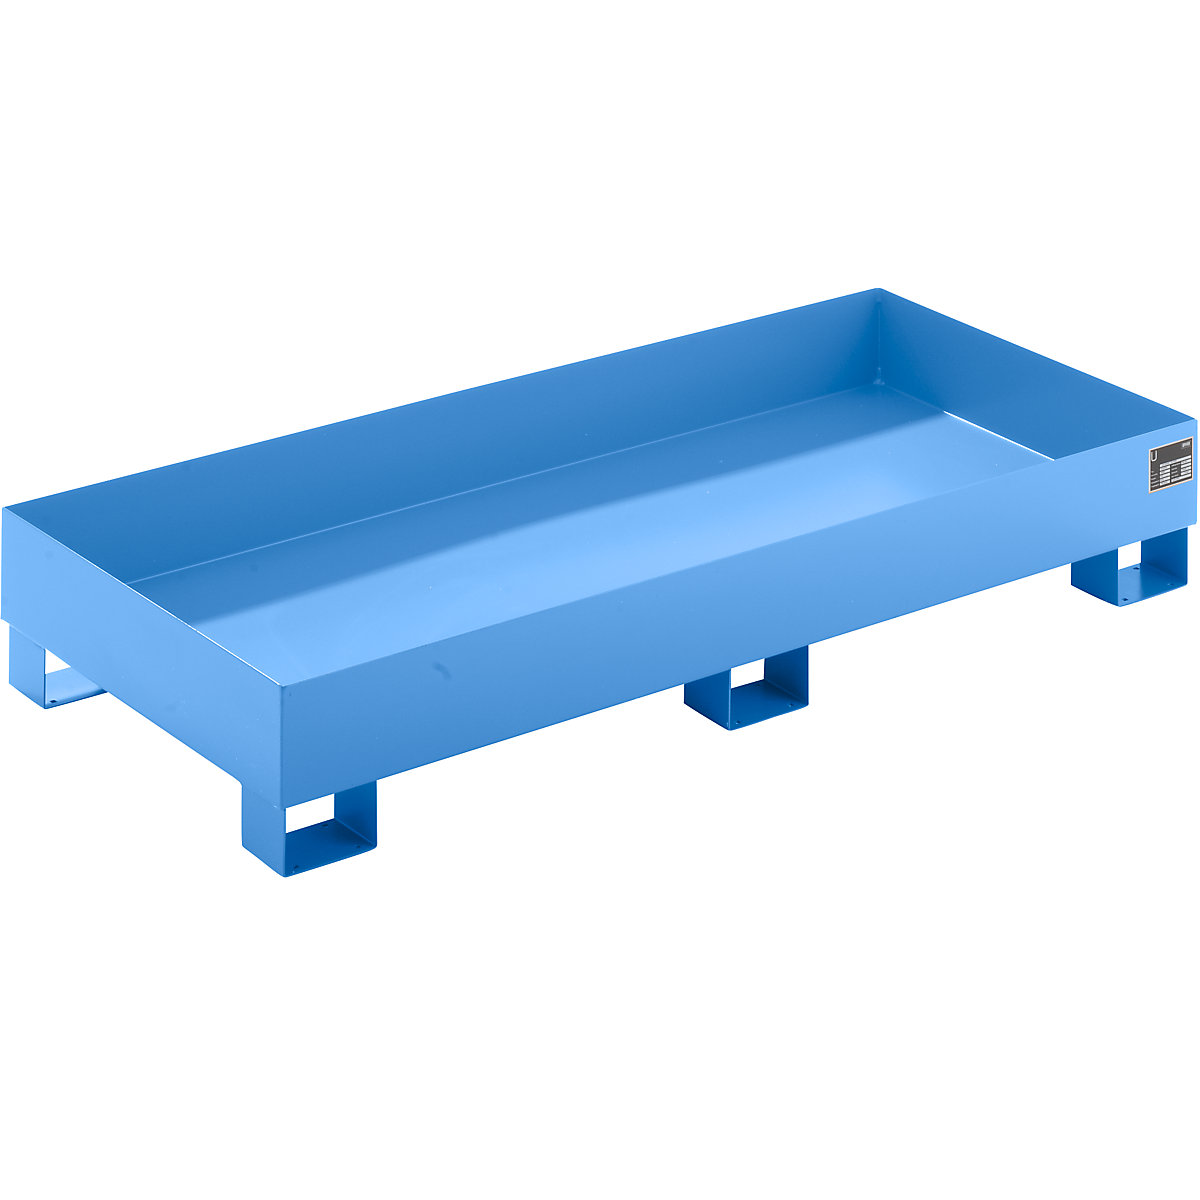 EUROKRAFTbasic – Sump tray made from sheet steel, LxWxH 1800 x 800 x 275 mm, blue RAL 5012